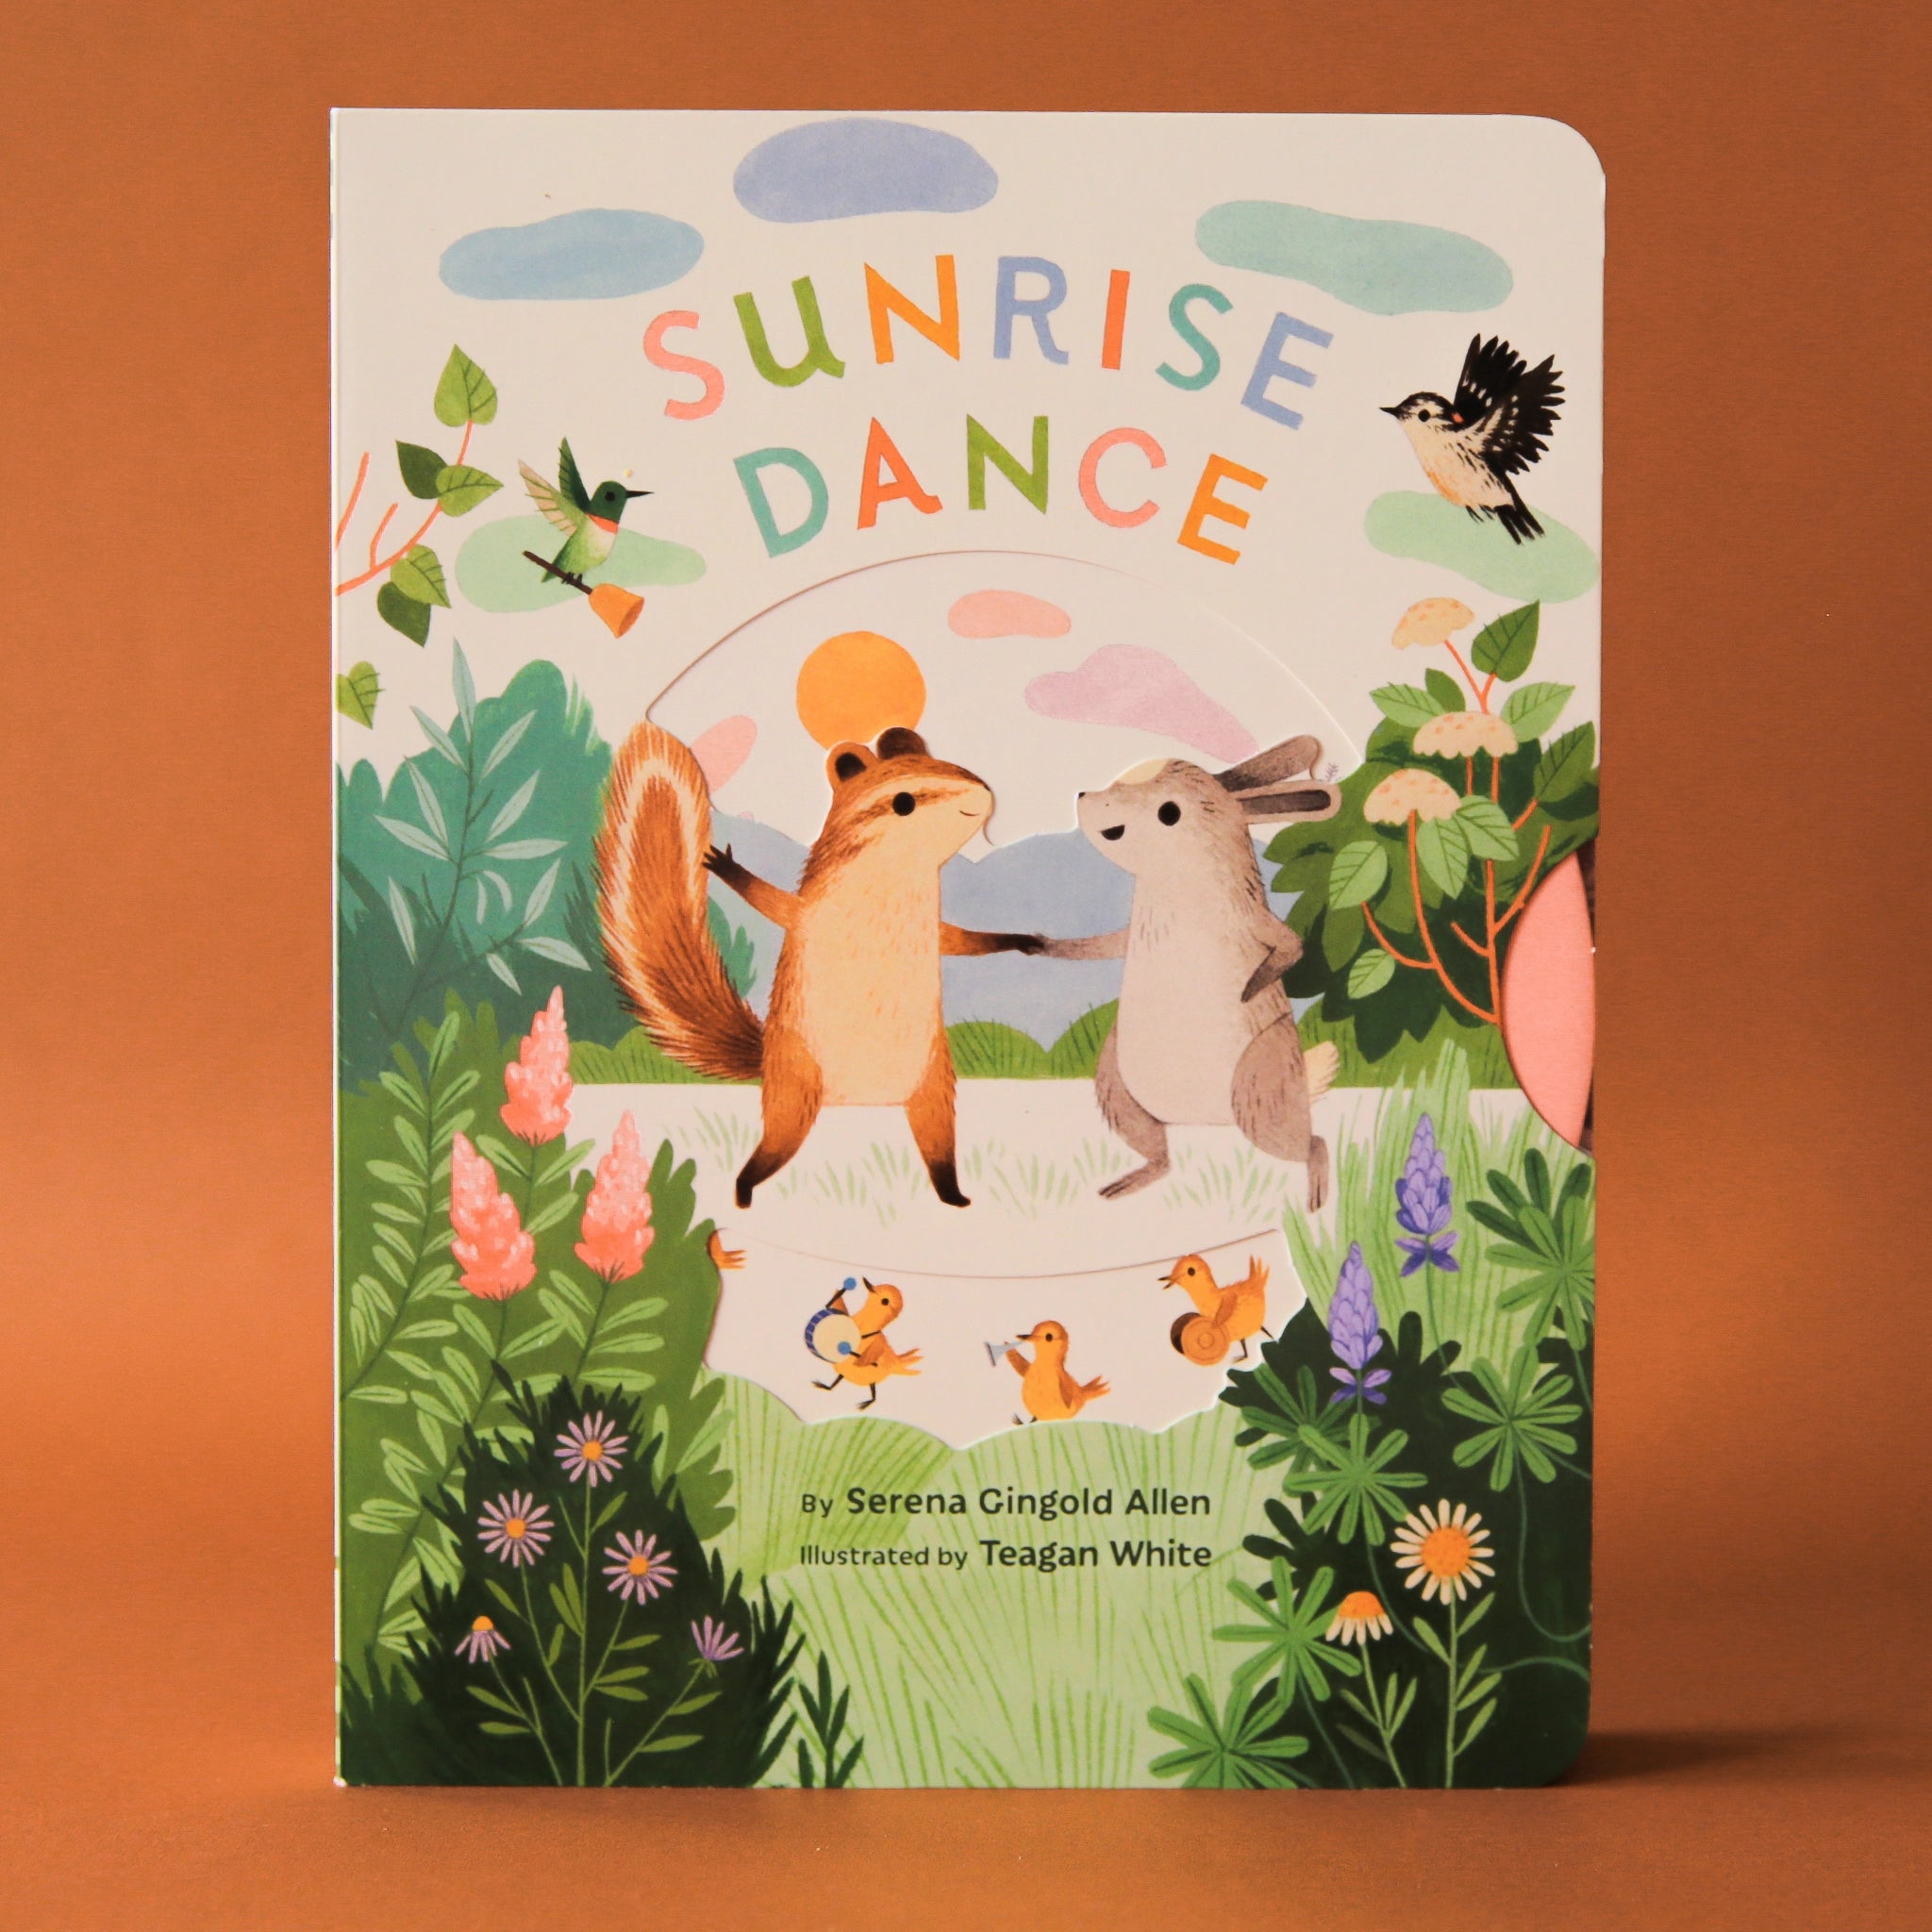  Hardcover children's book titled 'Sunrise Dance' in colorful lettering. Below the title is a spring themed scene of animals dancing in a grass field. Animals include a squirrel and bunny holding hands, instrument playing ducklings and more.